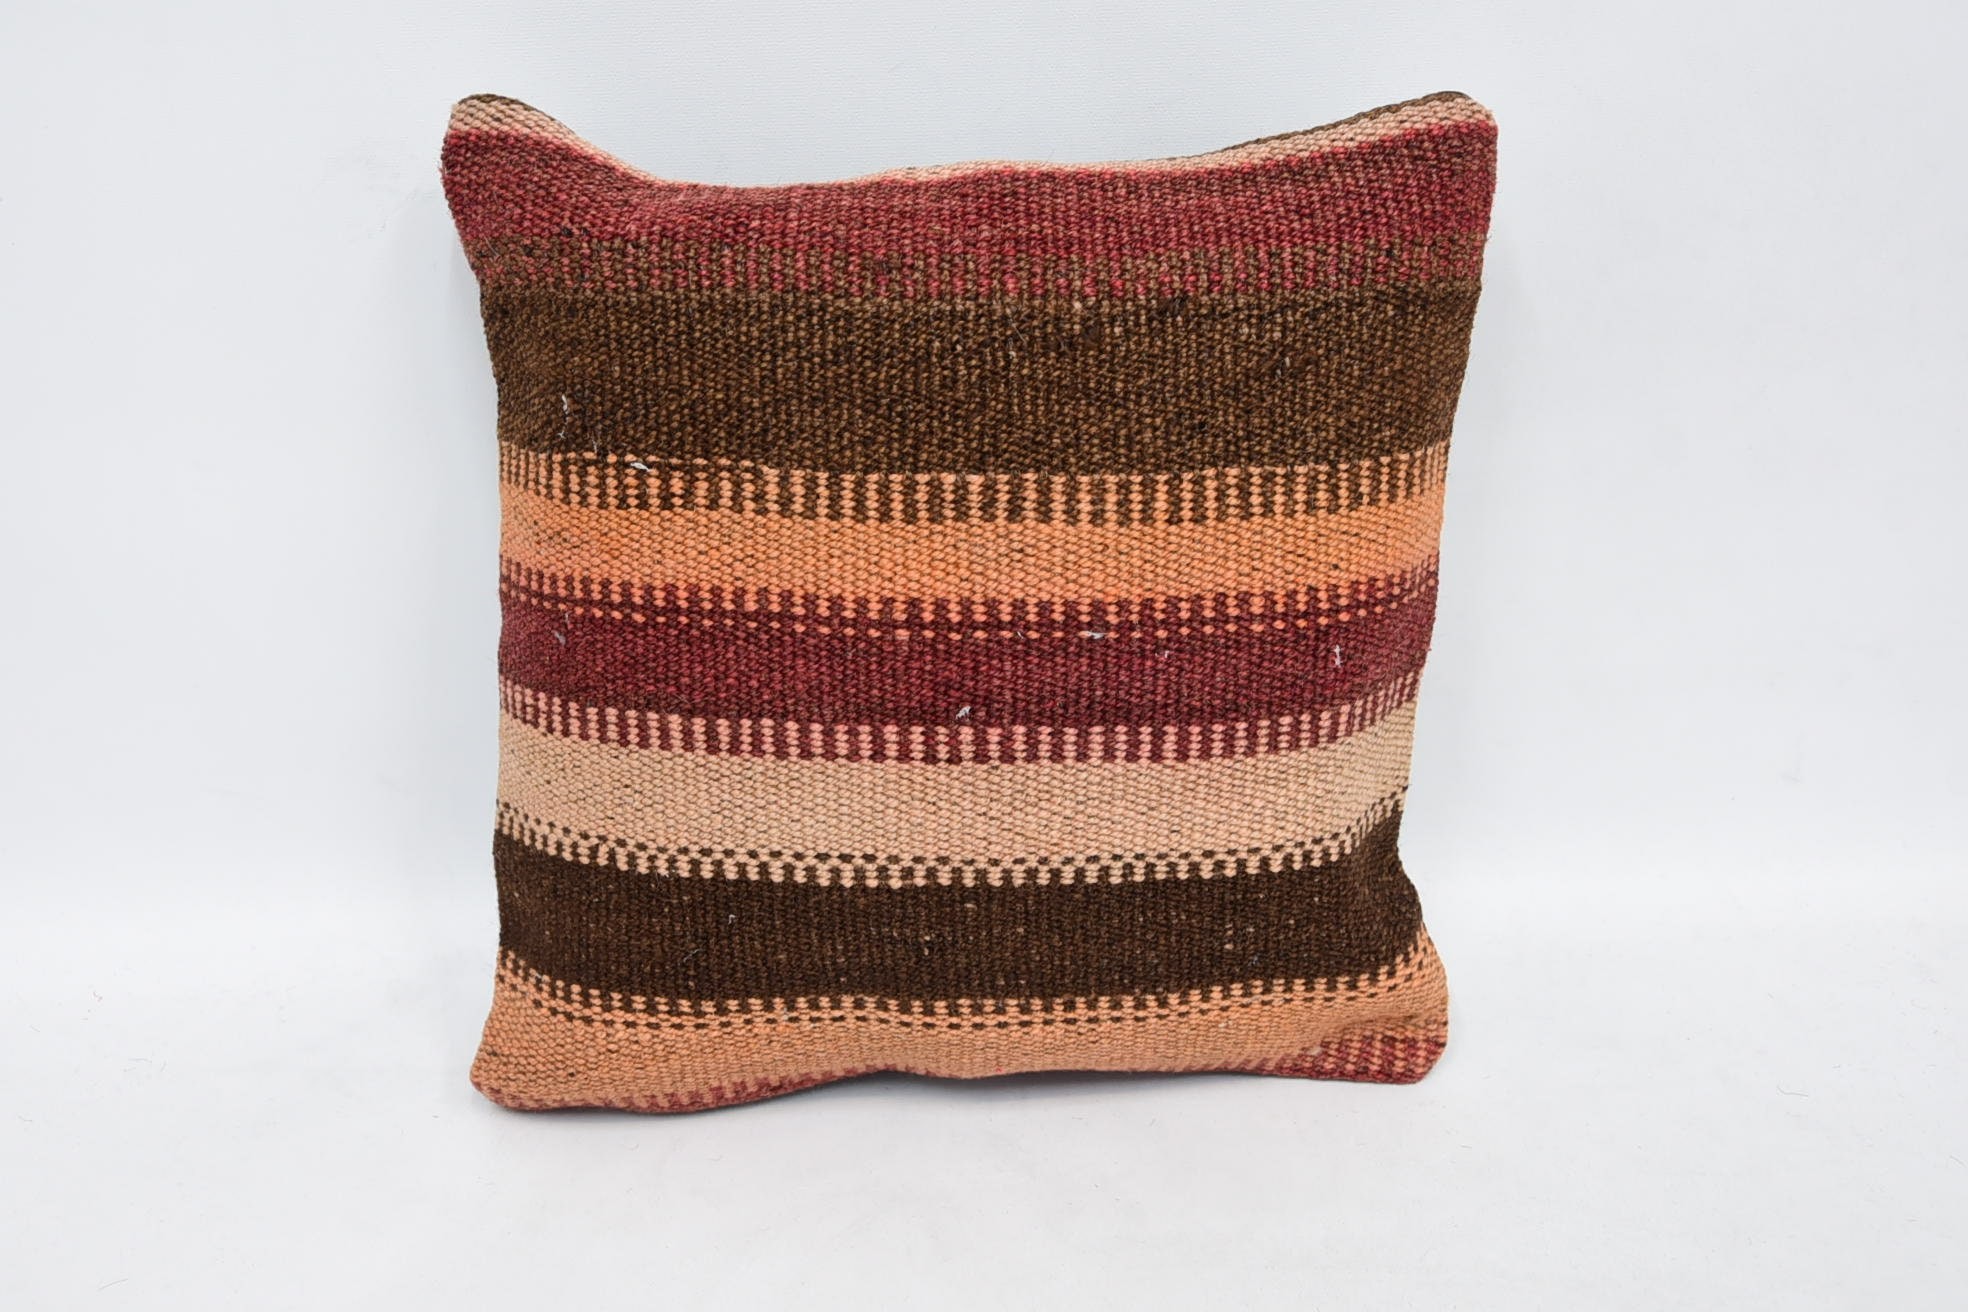 12"x12" Red Pillow Cover, Vintage Pillow, Turkish Corner Cushion Cover, Turkish Kilim Pillow, Antique Pillows, Rustic Pillow Case